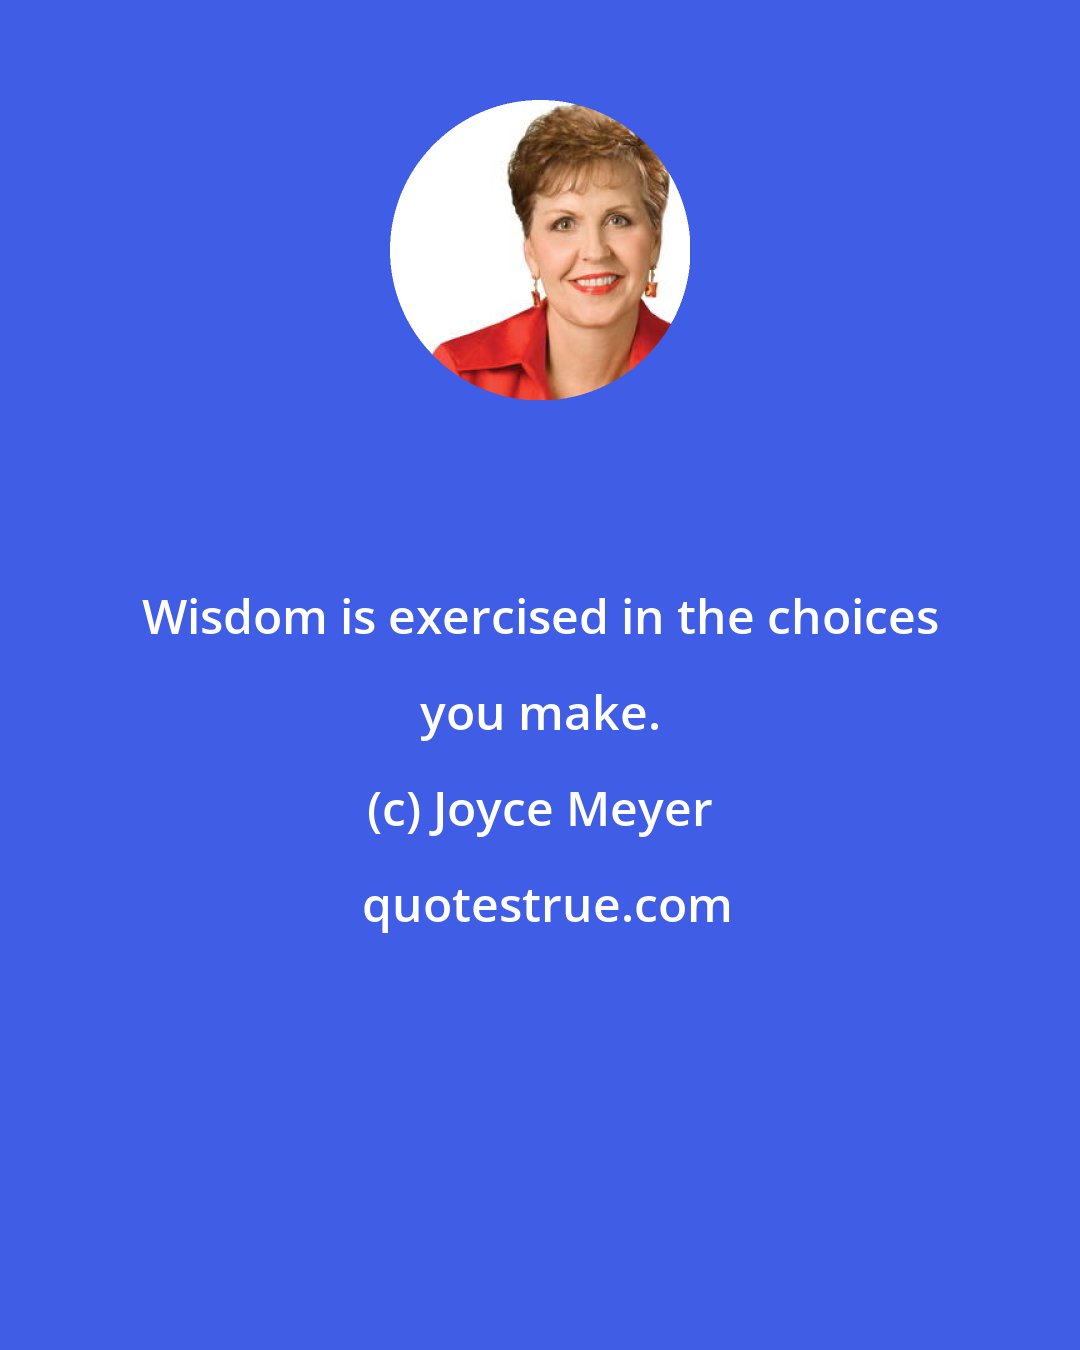 Joyce Meyer: Wisdom is exercised in the choices you make.